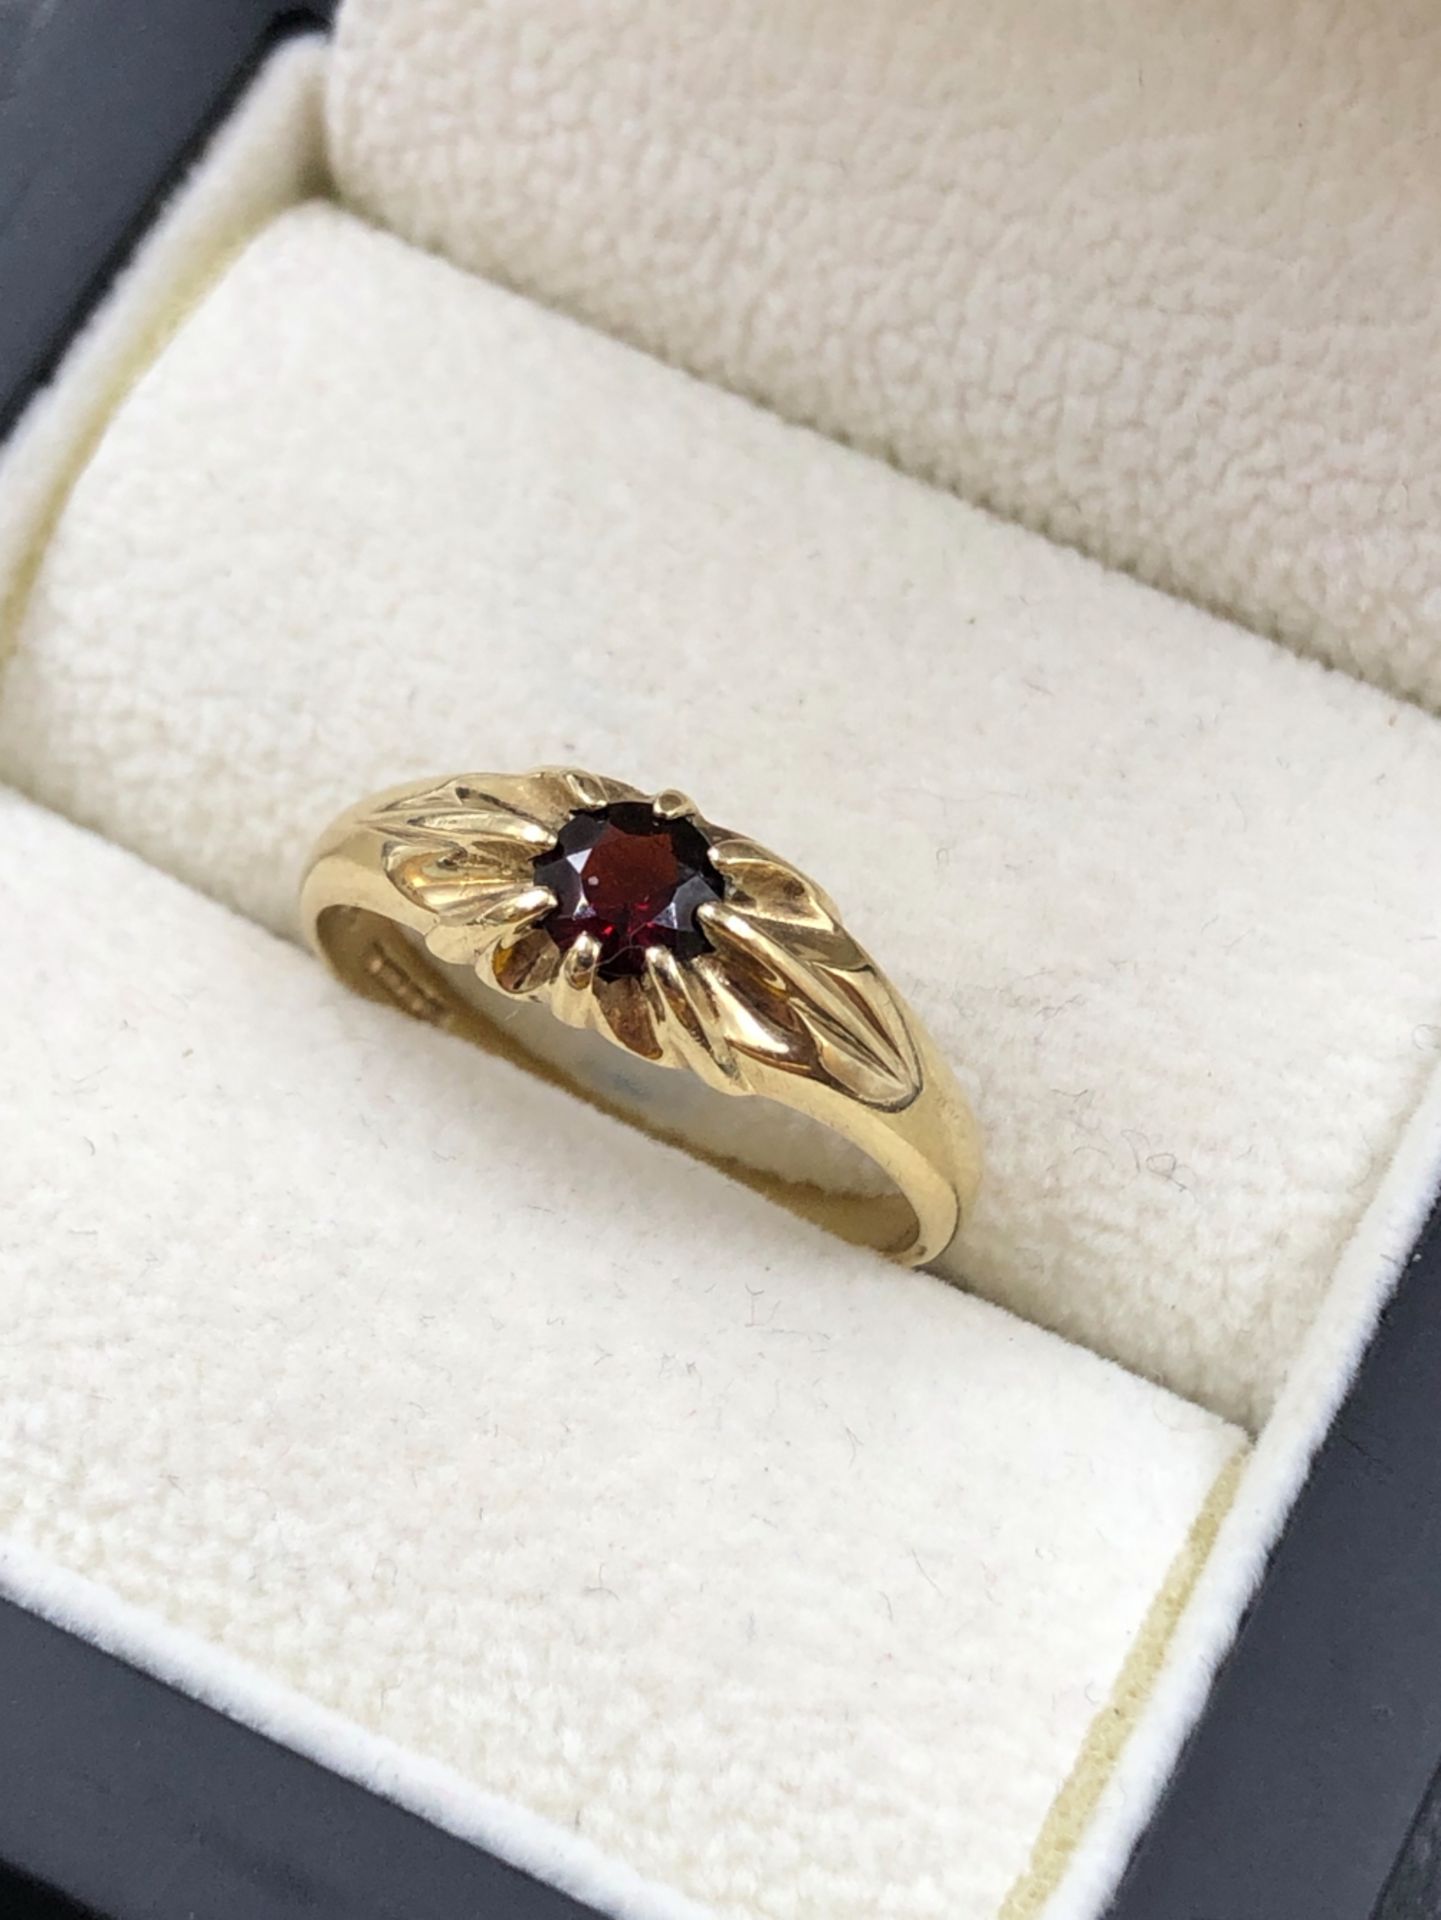 A 9ct HALLMARKED GOLD GARNET GYPSY SET RING. FINGER SIZE S. WEIGHT 2.28grms.